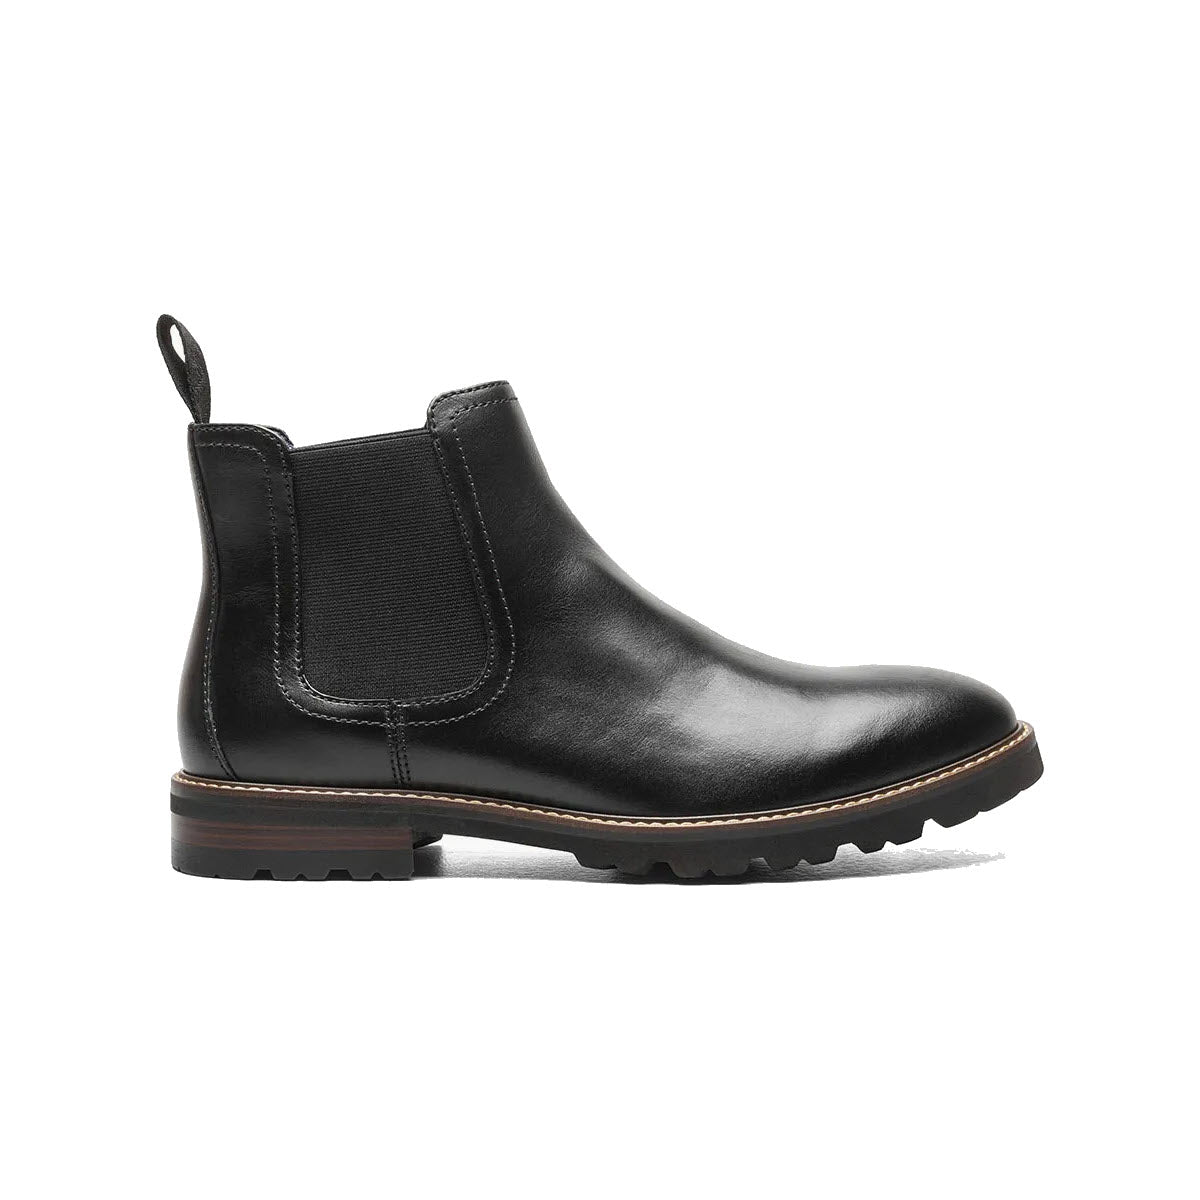 Florsheim RENEGADE PLAIN TOE GORE BOOT BLK SMOOTH with elastic side panels and a pull tab, displayed on a white background.